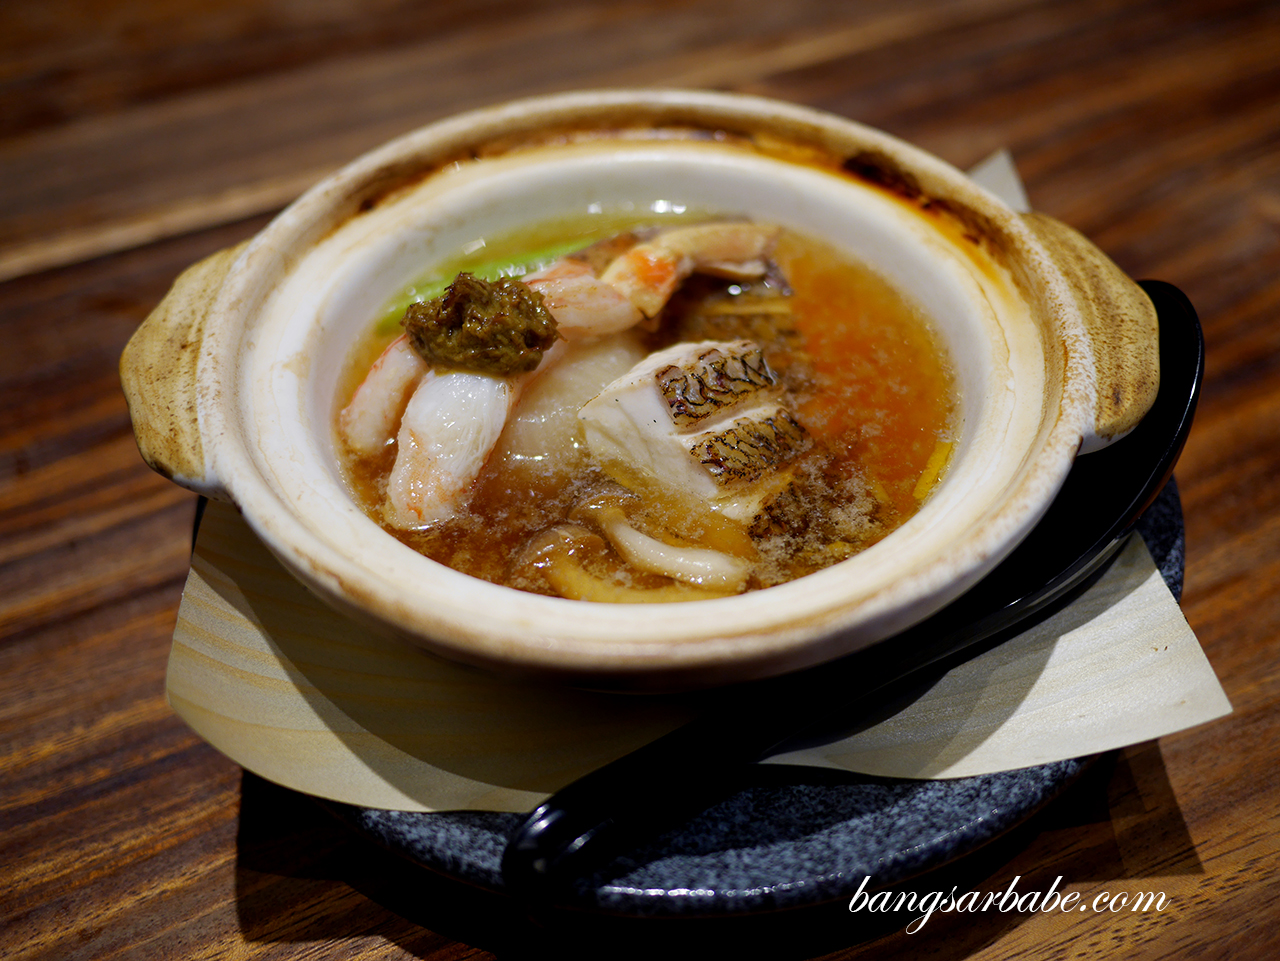 Omakase 7 Course (soup)